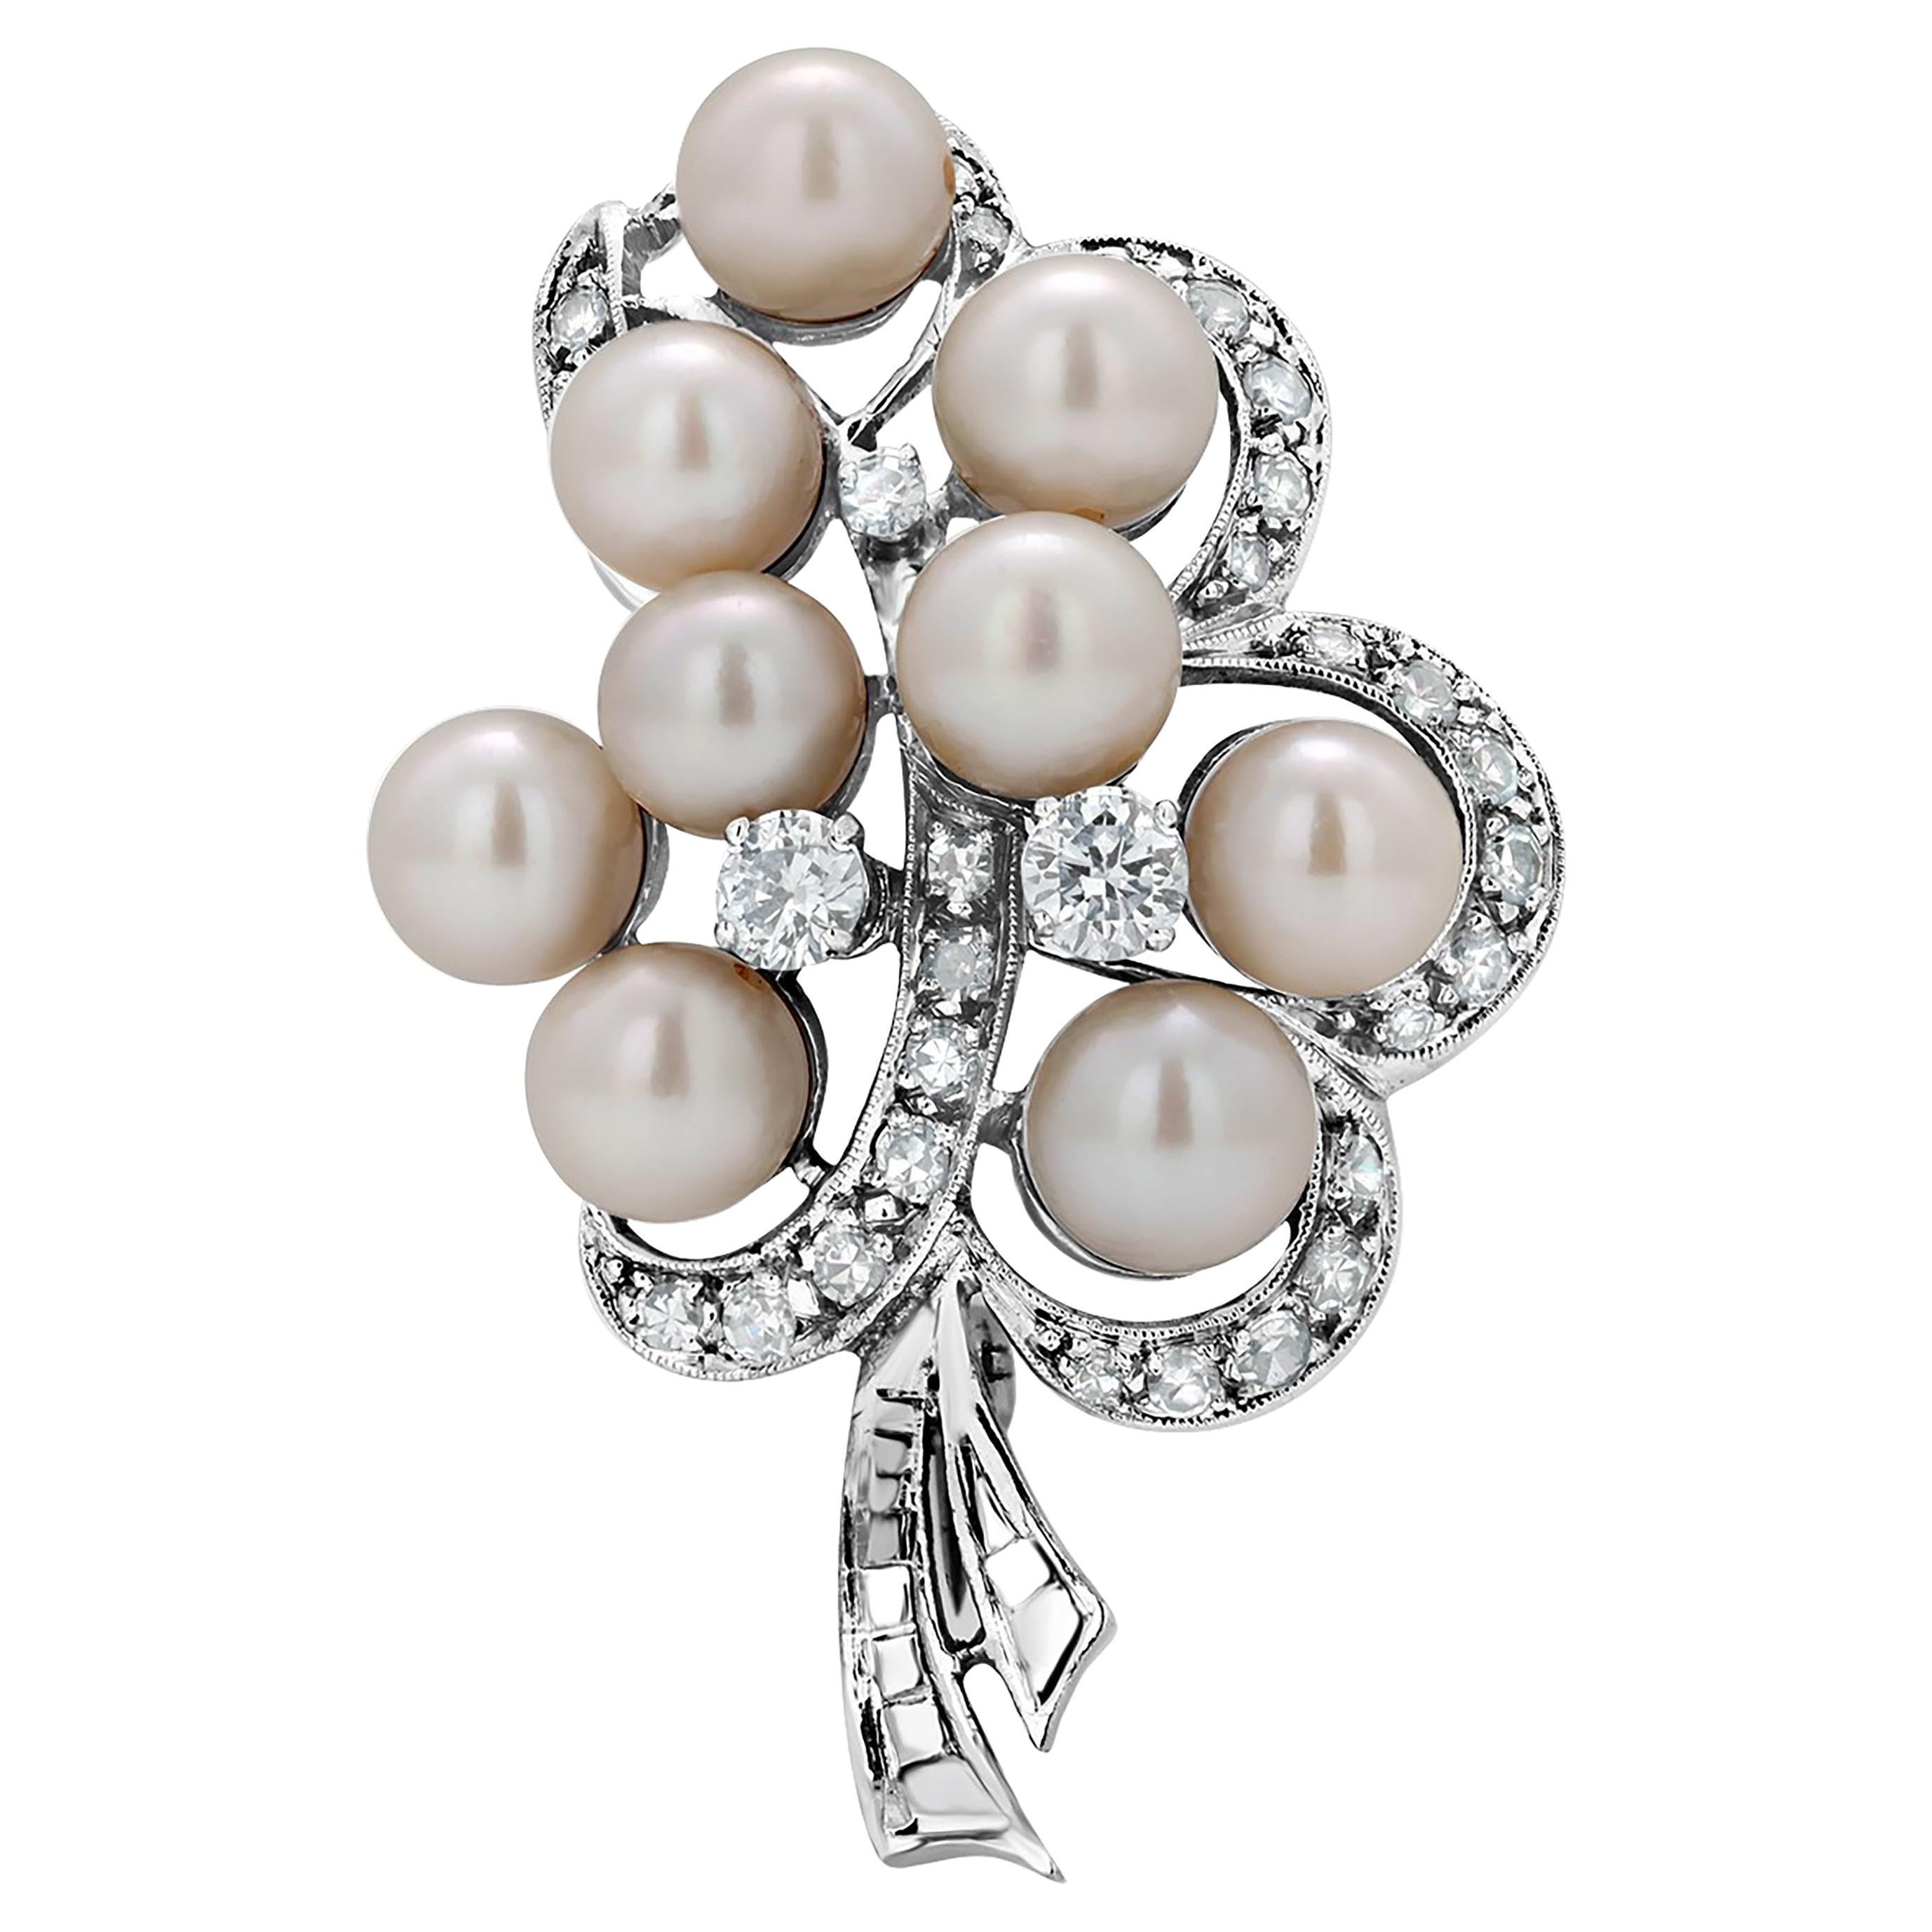 Vintage Art Deco White Gold Brooch Cultured Pearls and Diamonds